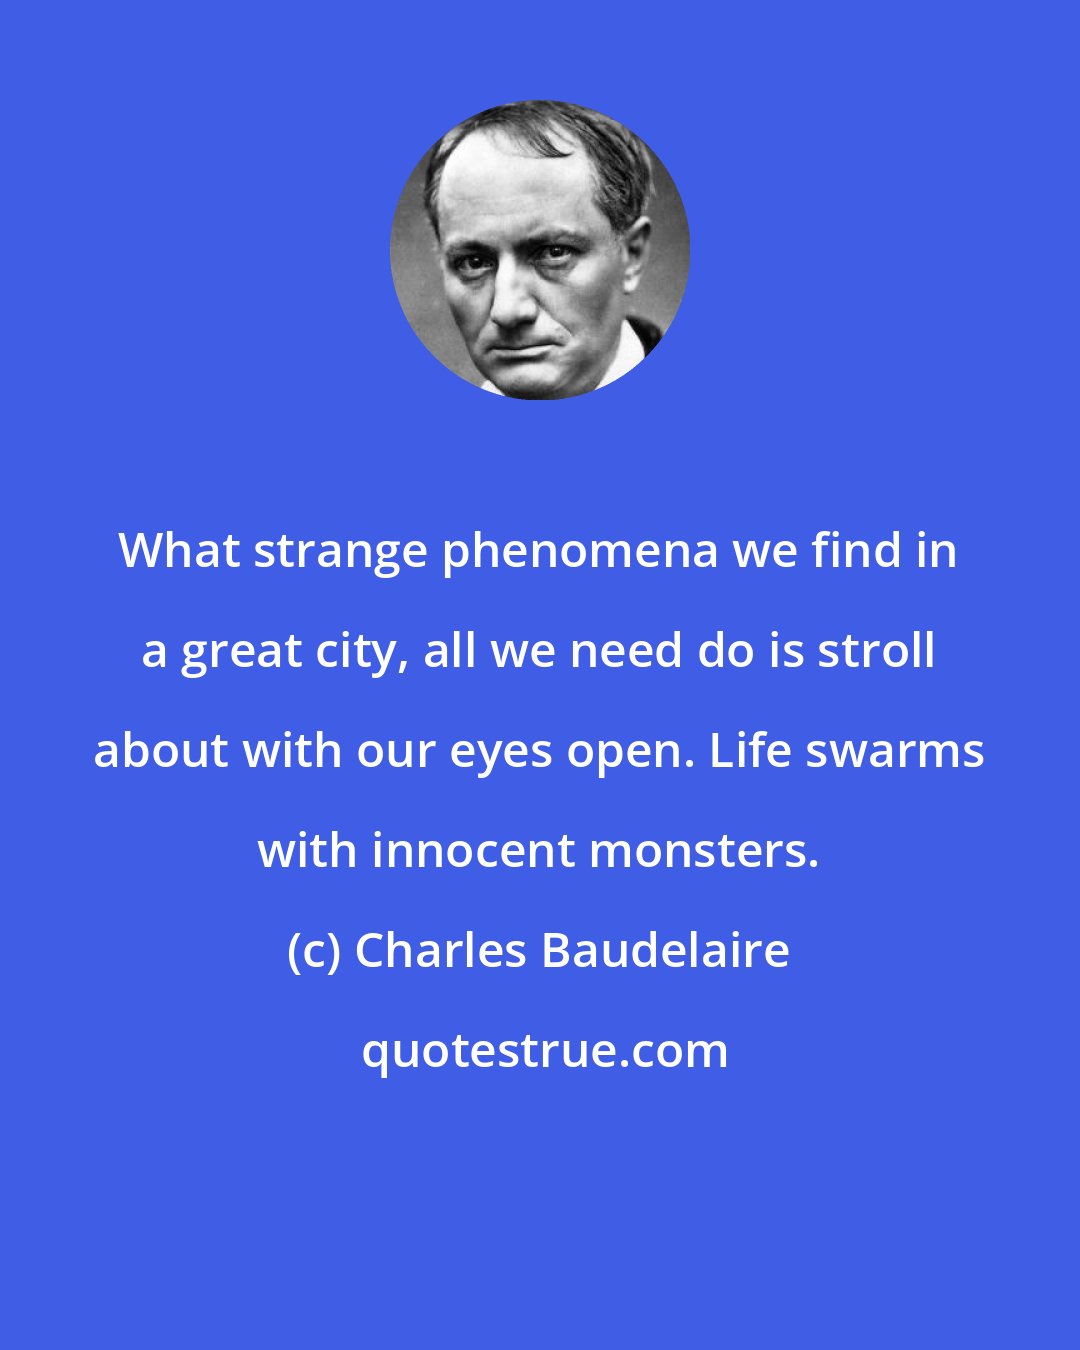 Charles Baudelaire: What strange phenomena we find in a great city, all we need do is stroll about with our eyes open. Life swarms with innocent monsters.